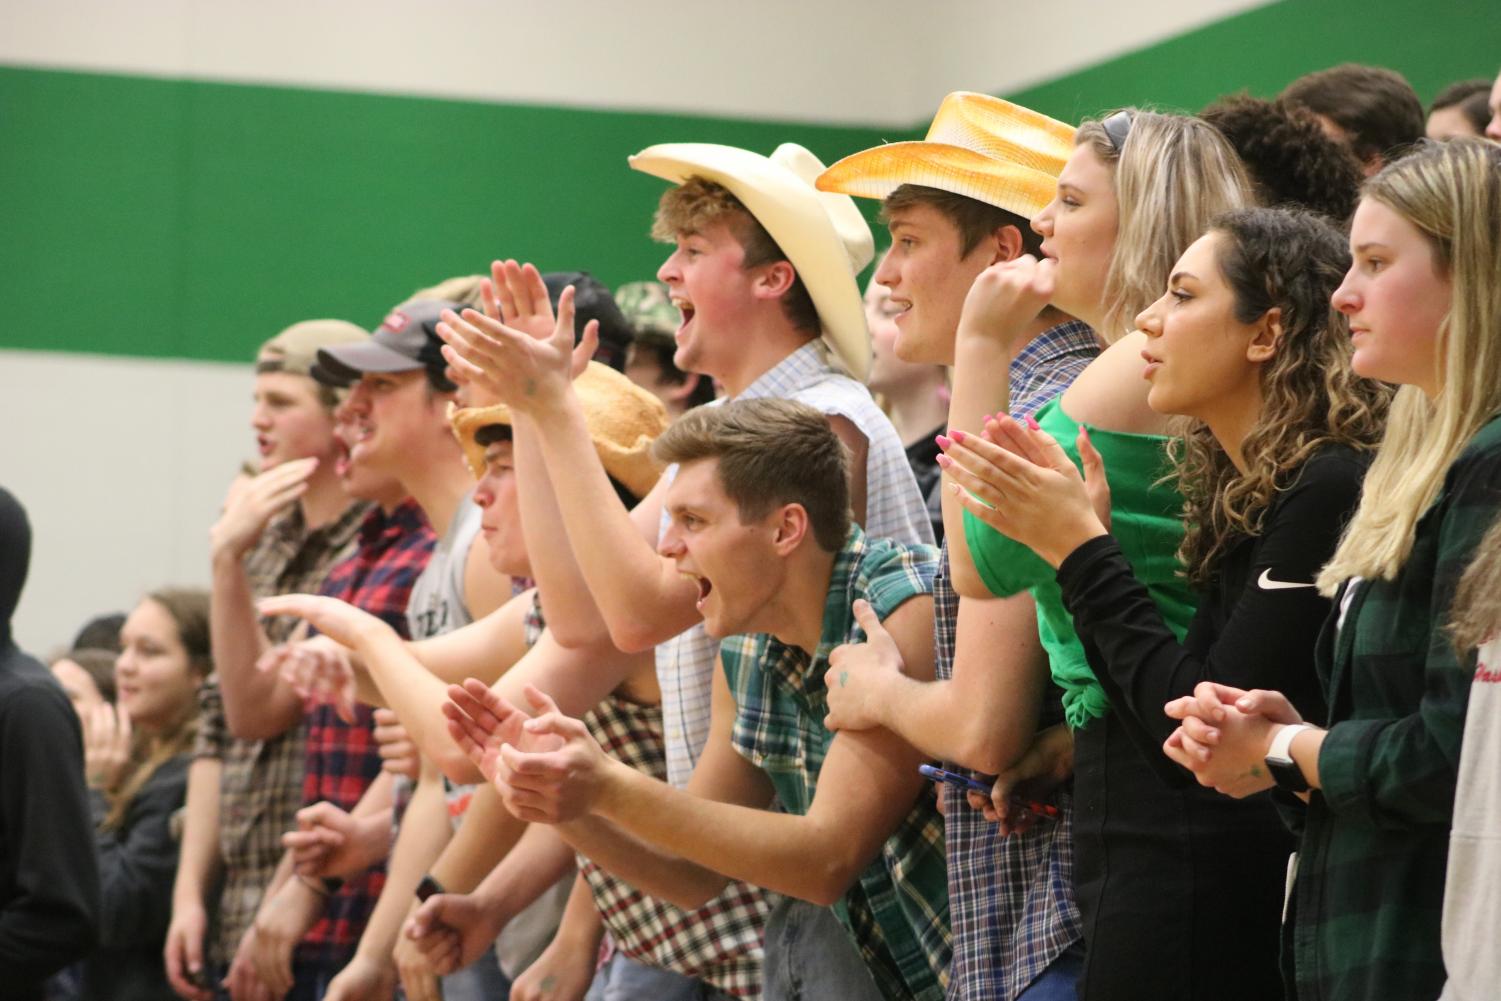 Varsity+boys+basketball+Derby+vs.+Campus%2C+Mr.+Panther+at+Halftime+%28Photos+by+Jay+Warrick%29